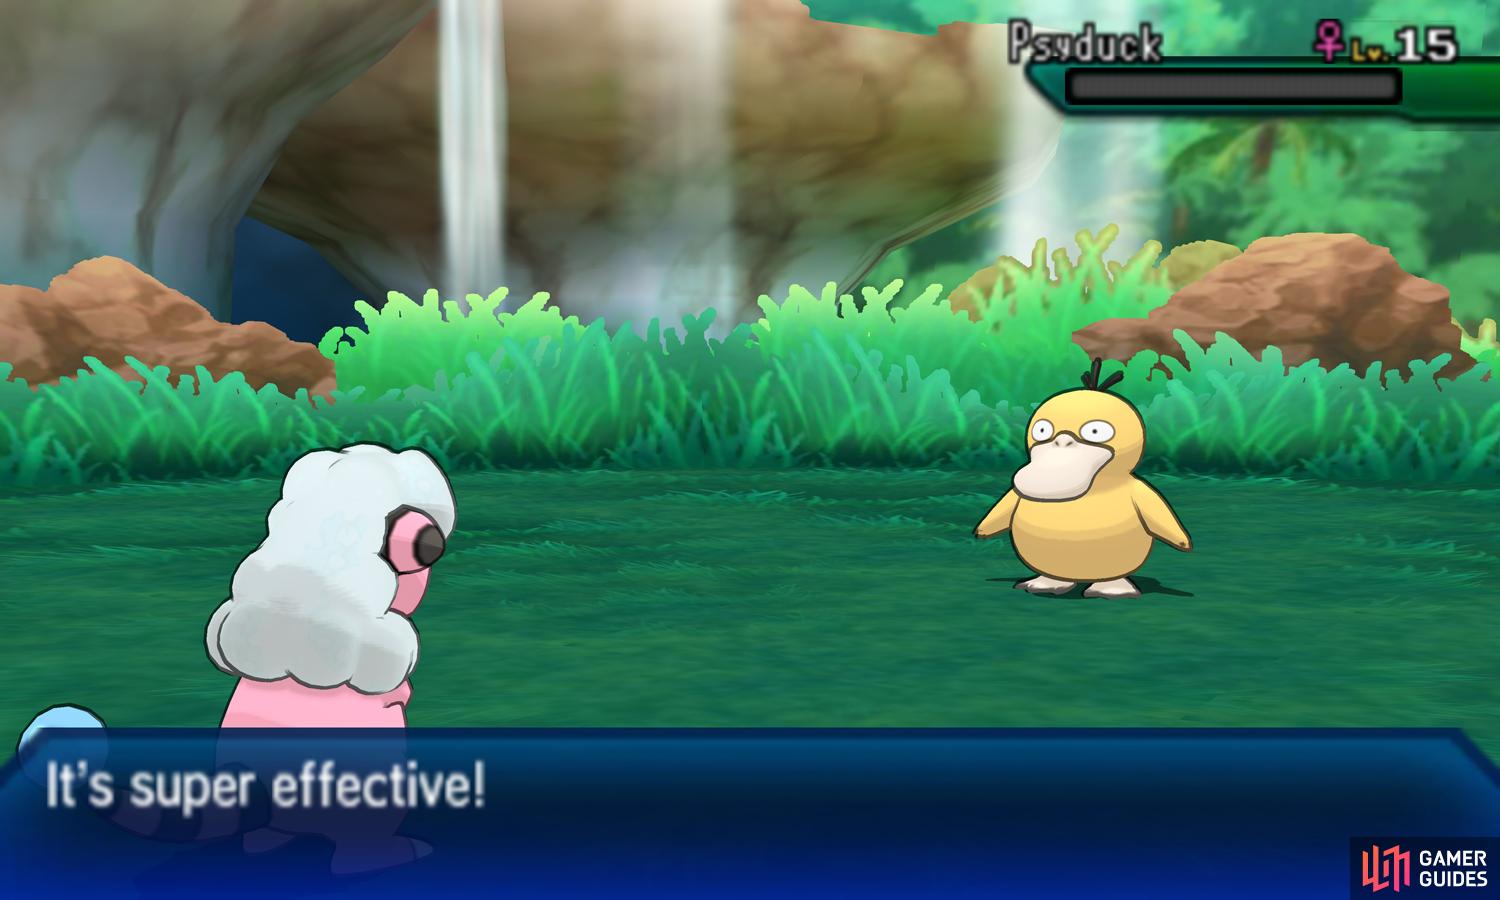 There's no need to stress like Psyduck: you either win or you lose.